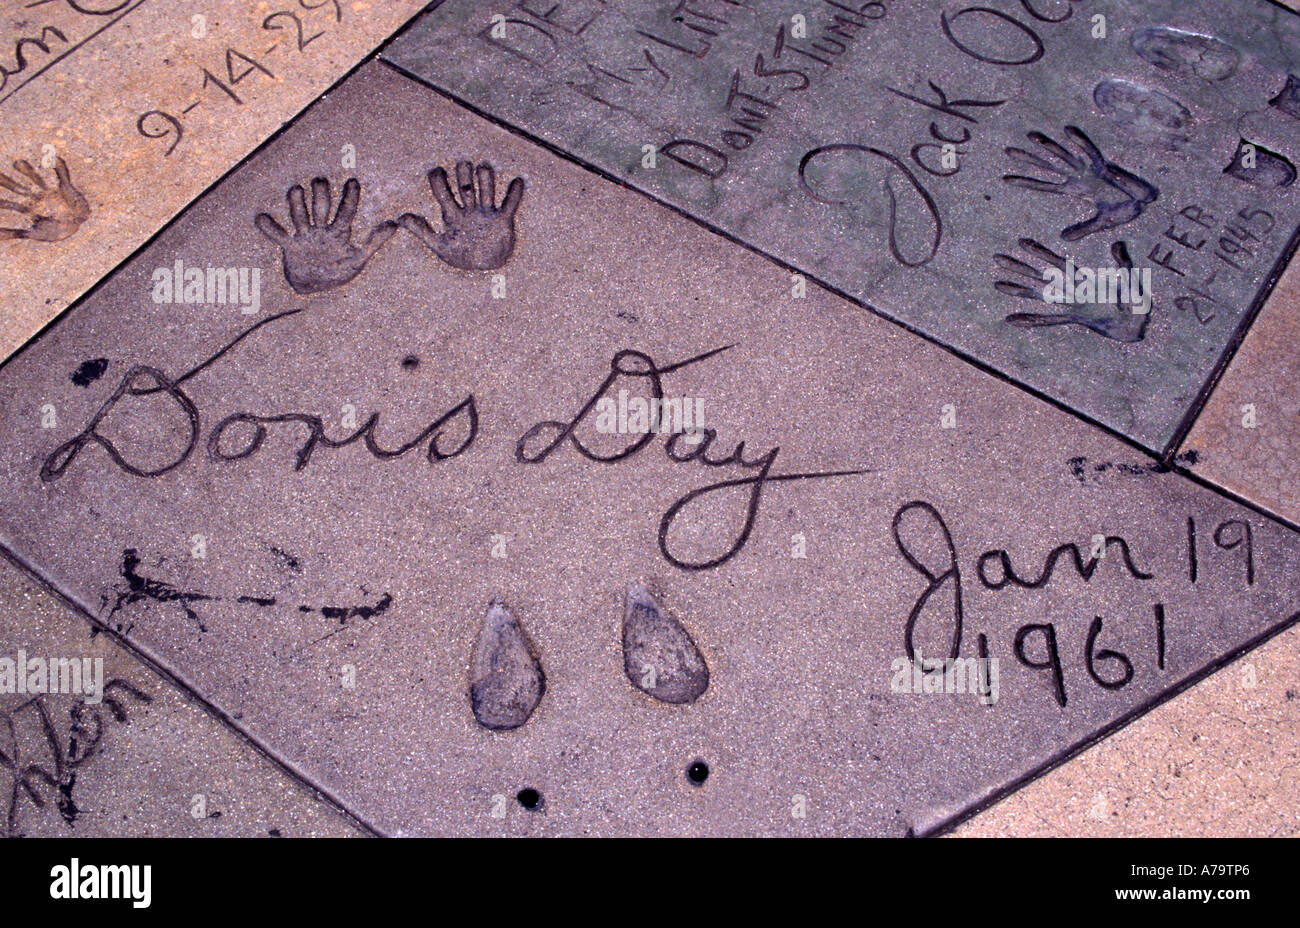 Doris Tag Hand Fuß Drucke Pflasterung Chinese Theater in Hollywood Boulevard in Los Angeles Stockfoto